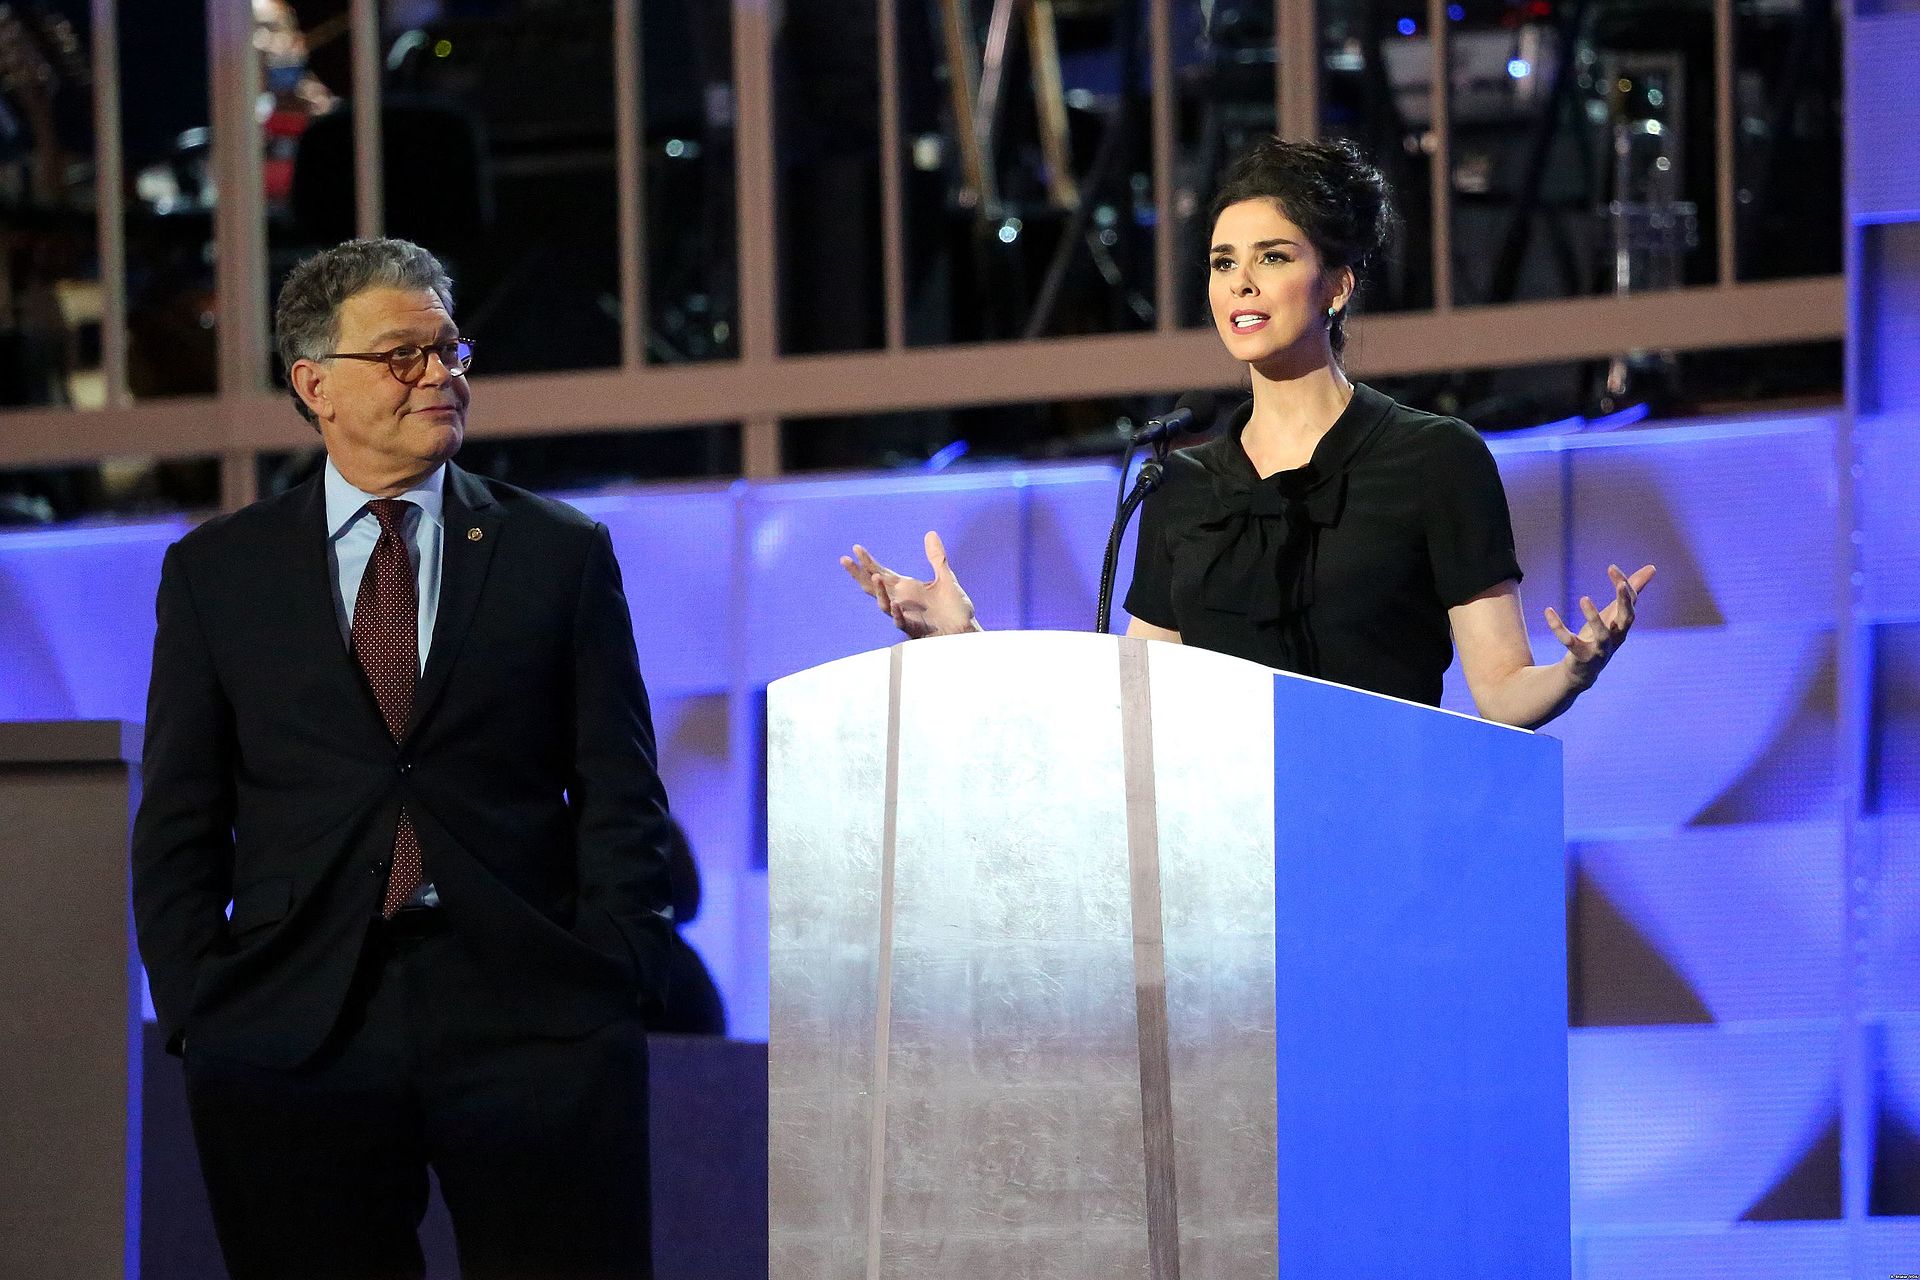 Sarah Silverman and Al Franken DNC July 2016 Susan Silverman Leads The Charge Against OpenAI